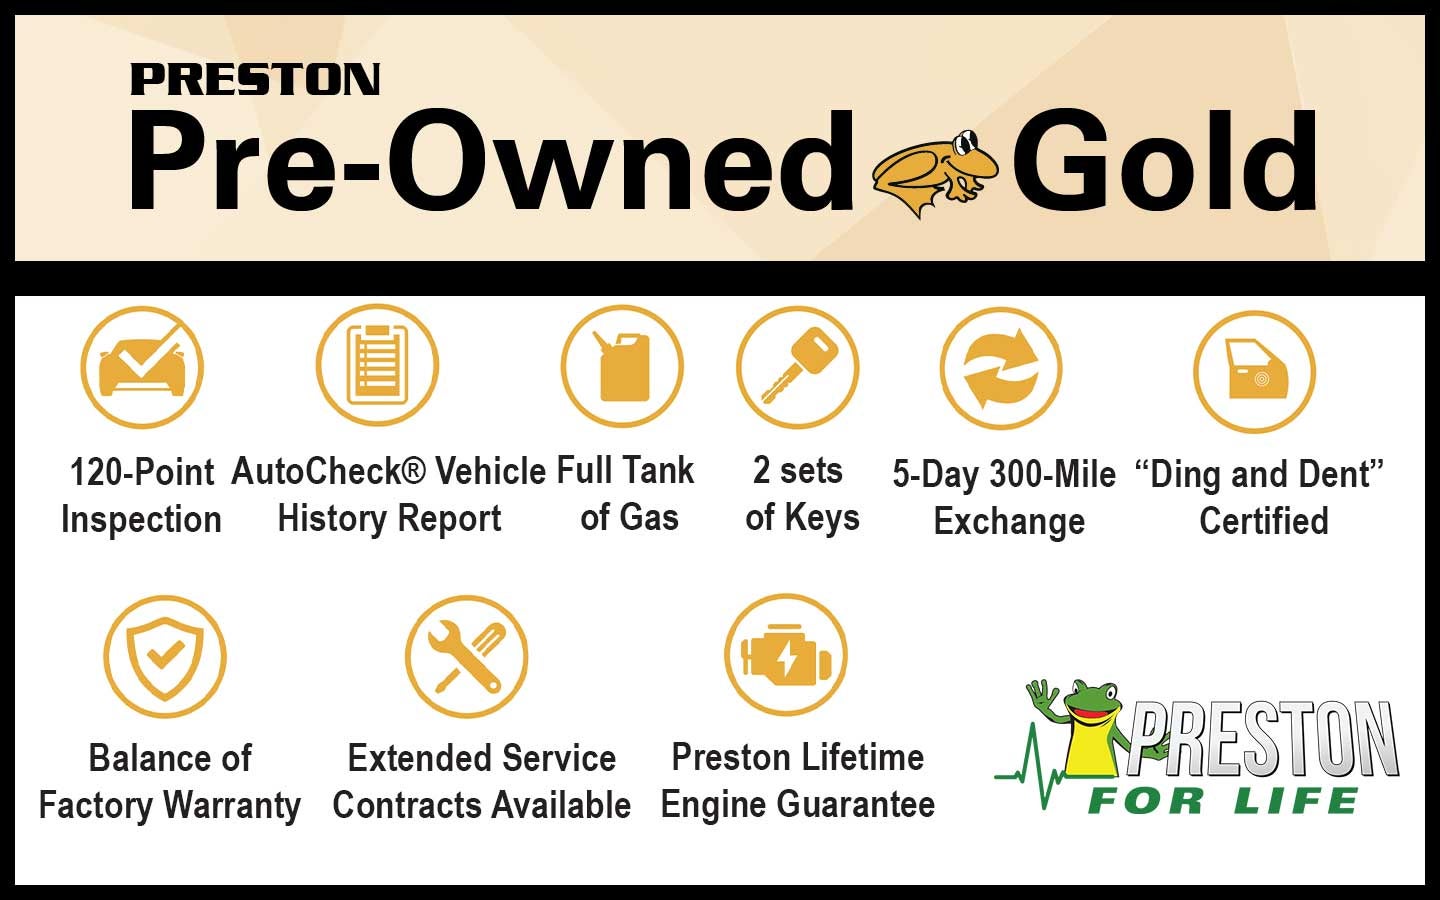 Pre-Owned Gold at Preston Ford Commercial Vehicle Center in Hurlock MD